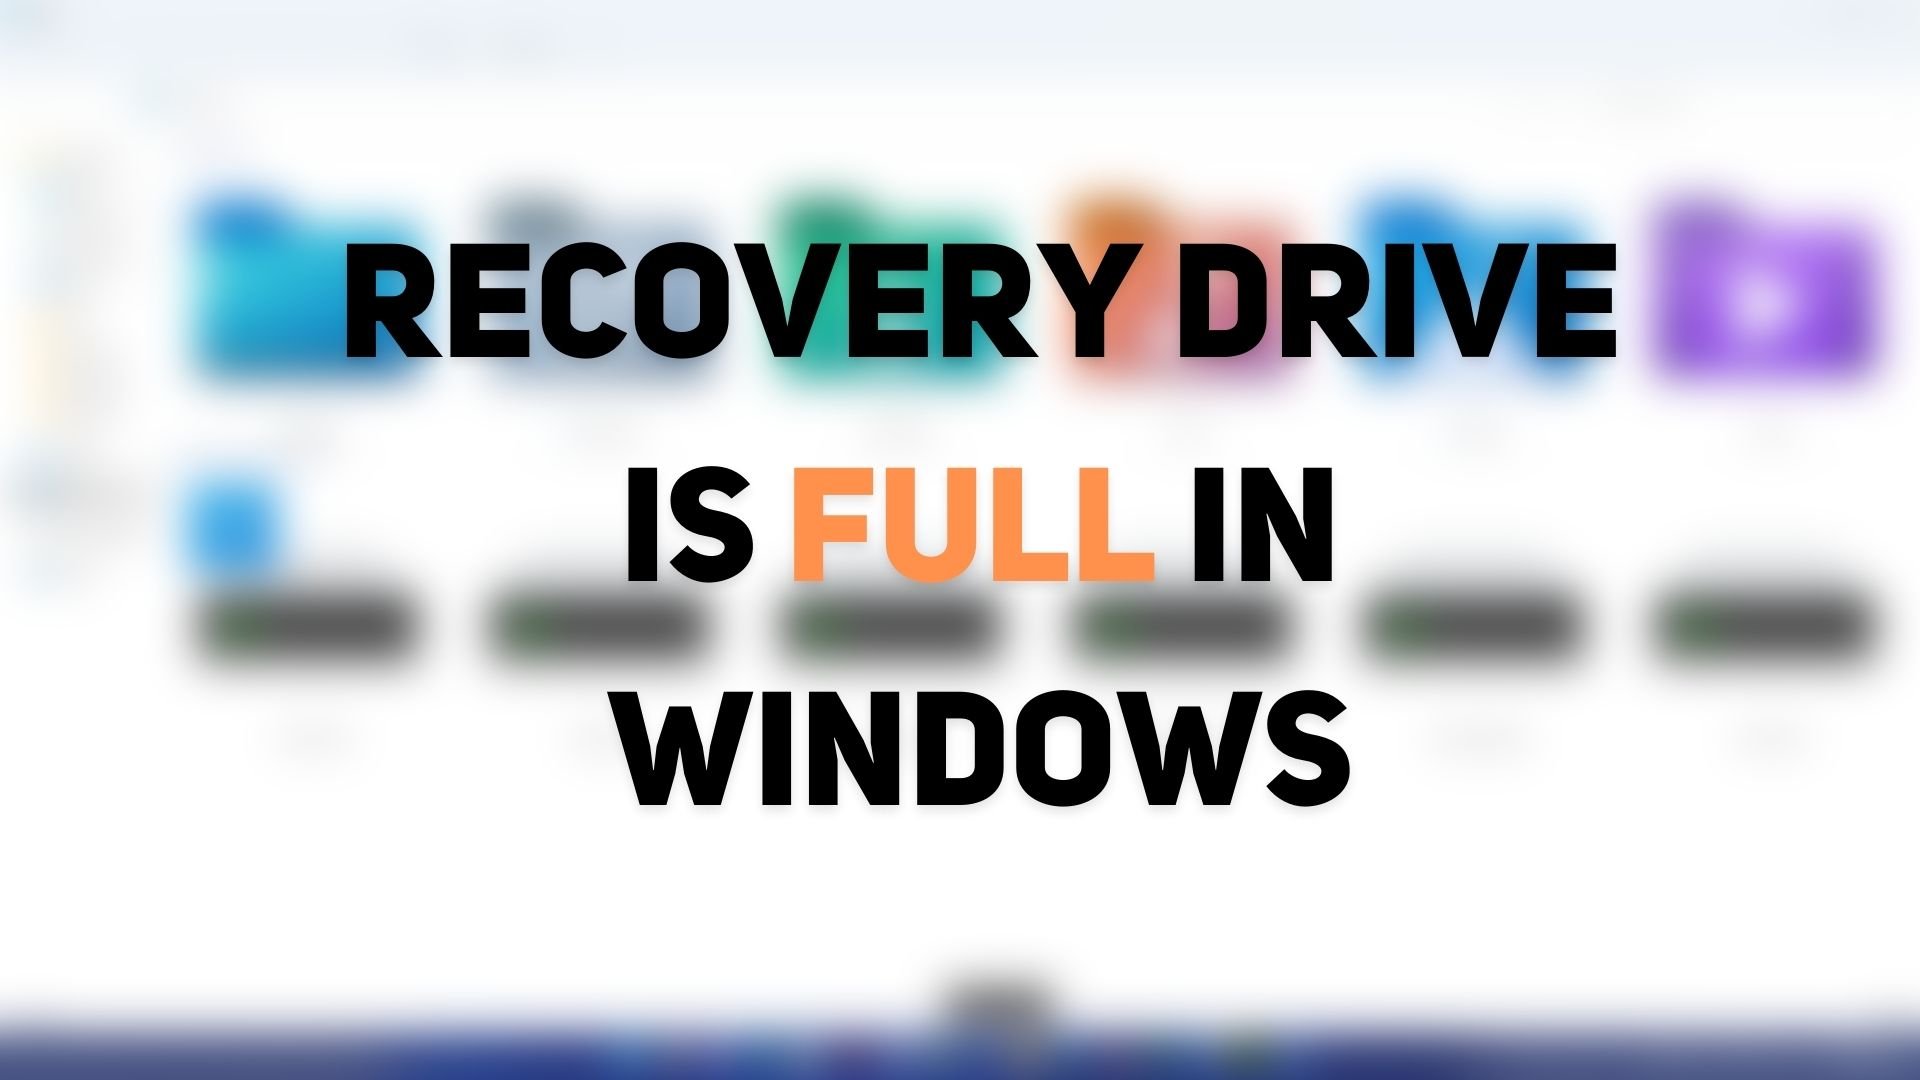 Recovery Drive is full in Windows